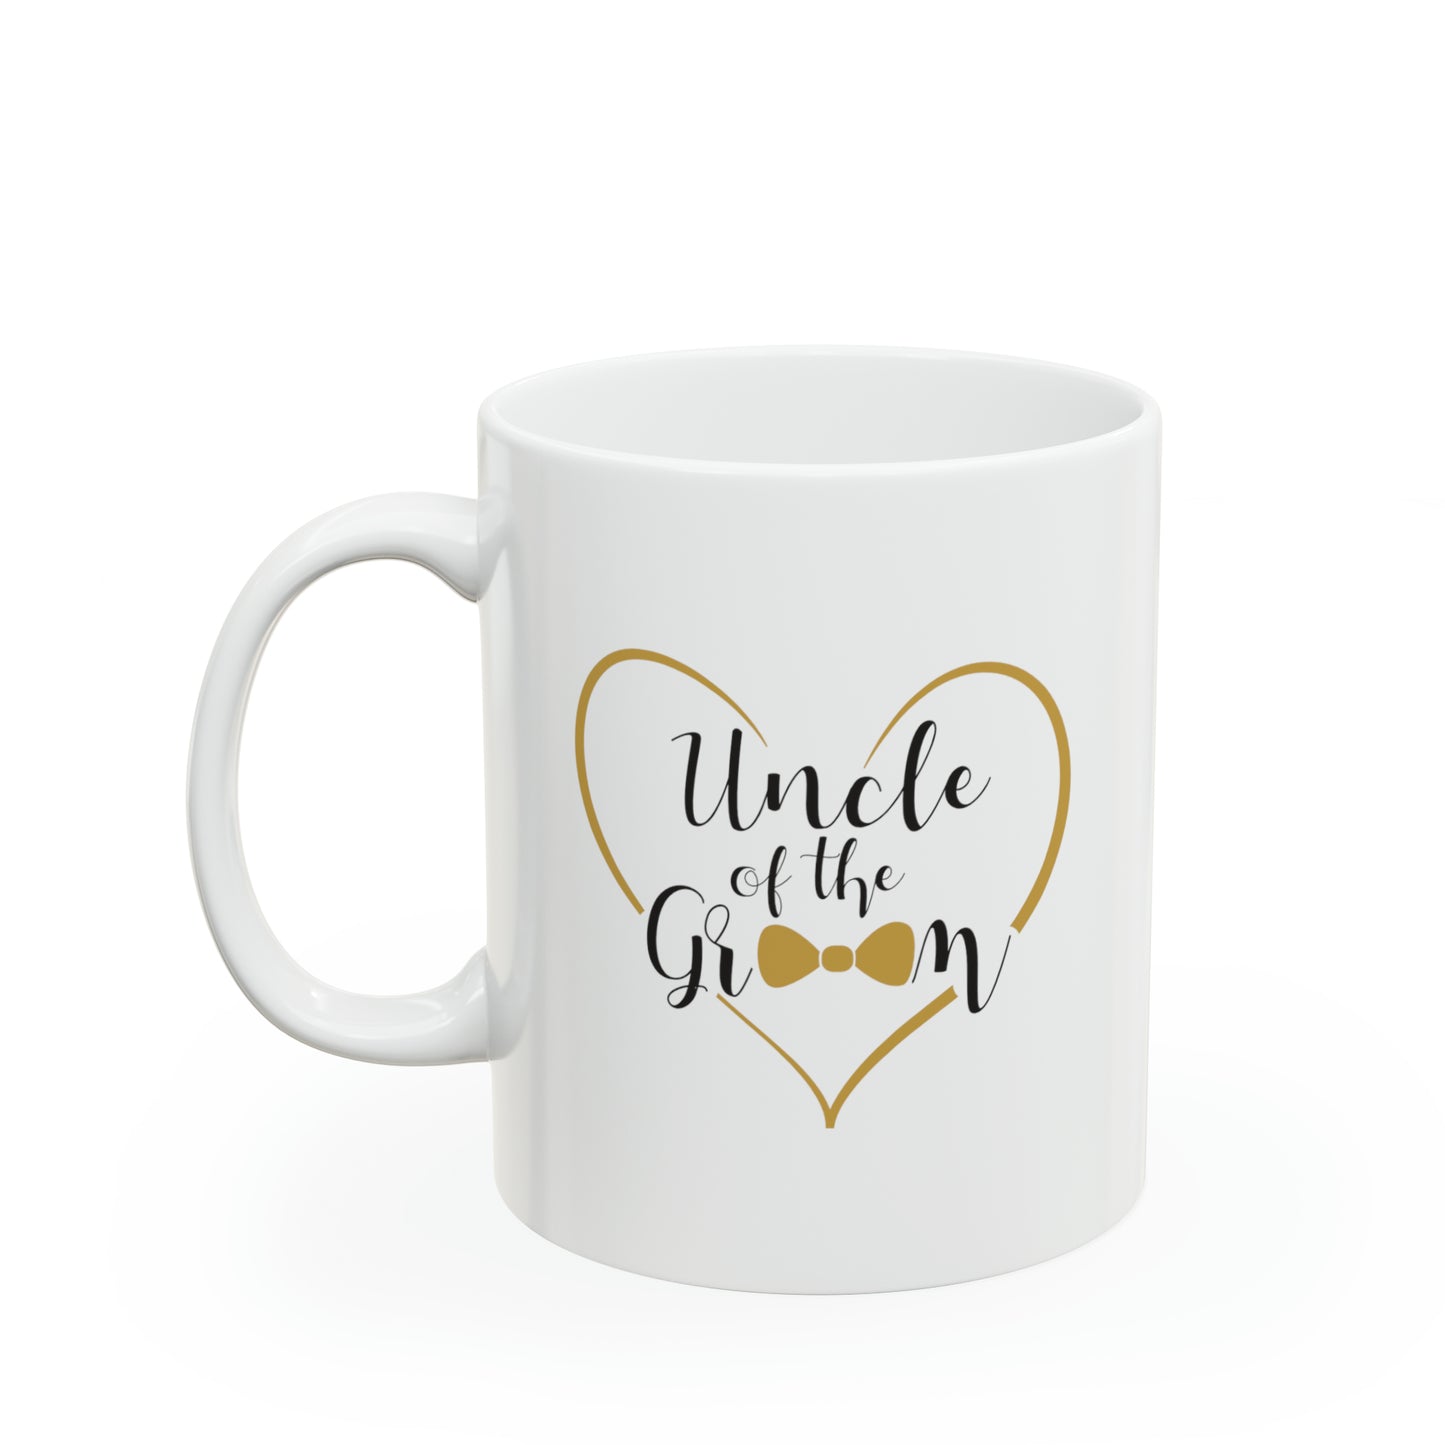 Uncle of the Groom Coffee Mug - Double Sided 11oz White Ceramic by TheGlassyLass.com